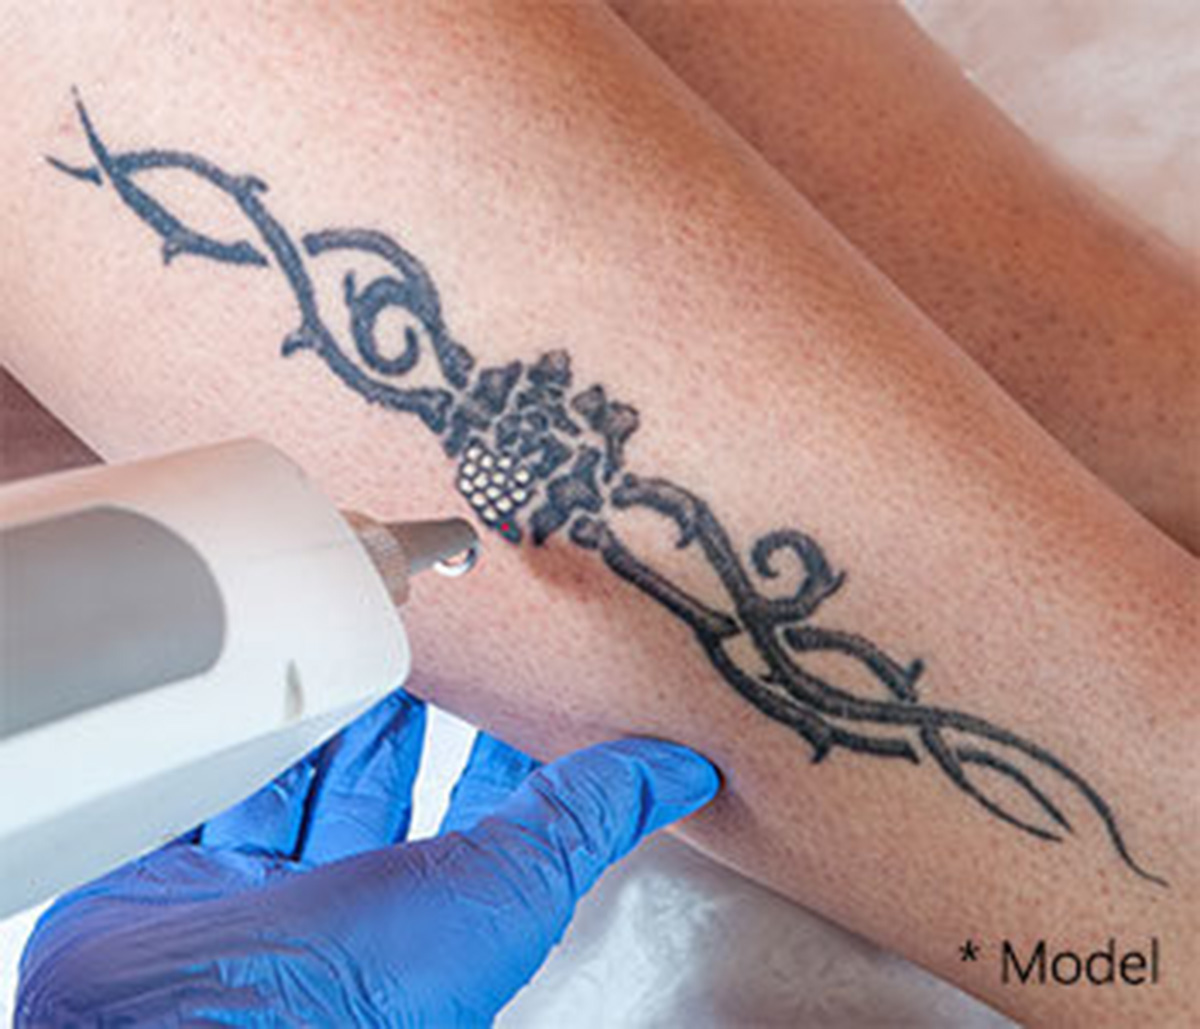 PicoSure Laser Tattoo Removal Results Beverly Hills - Plastic Surgeon